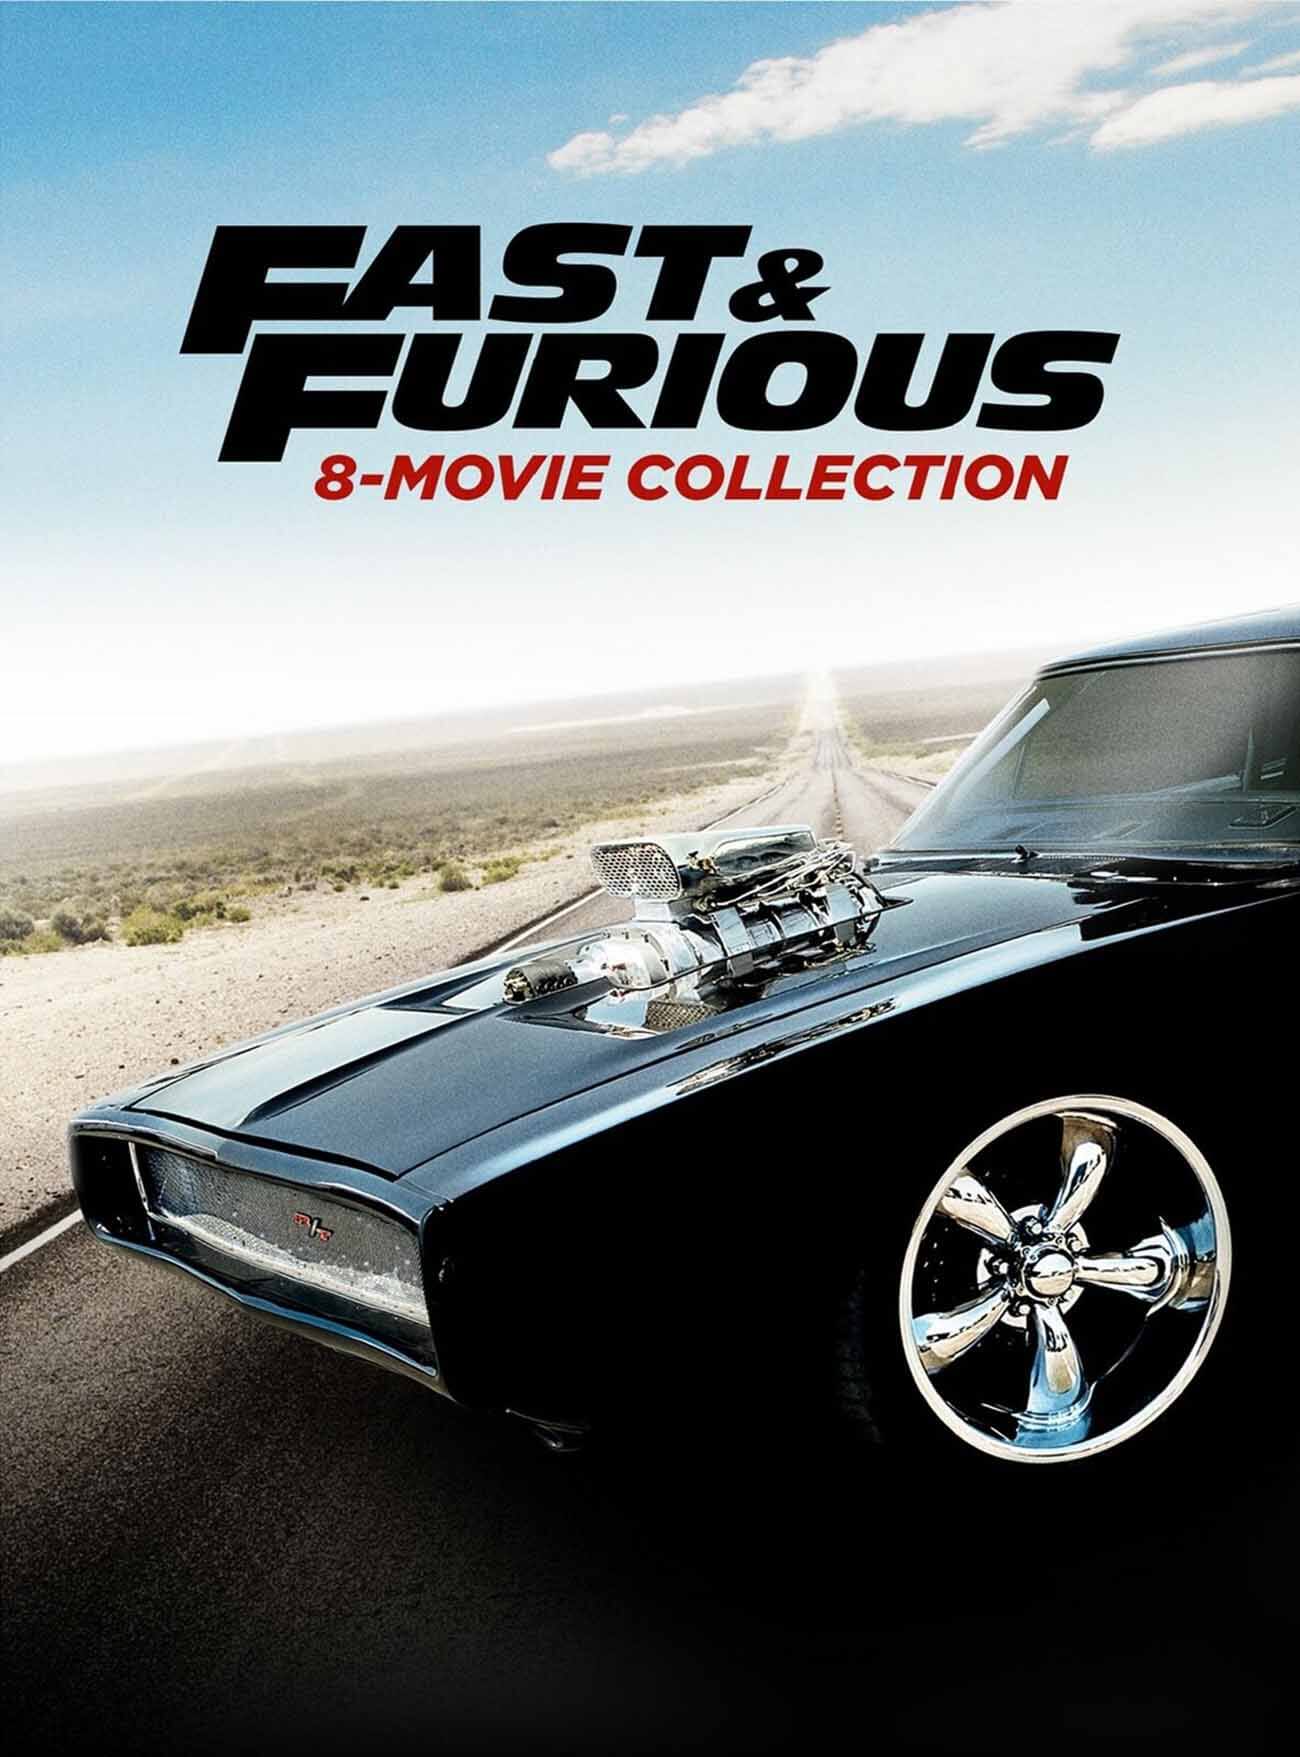 FAST AND FURIOUS COMPLETE 8-MOVIE COLLECTION DVD & BLU-RAY